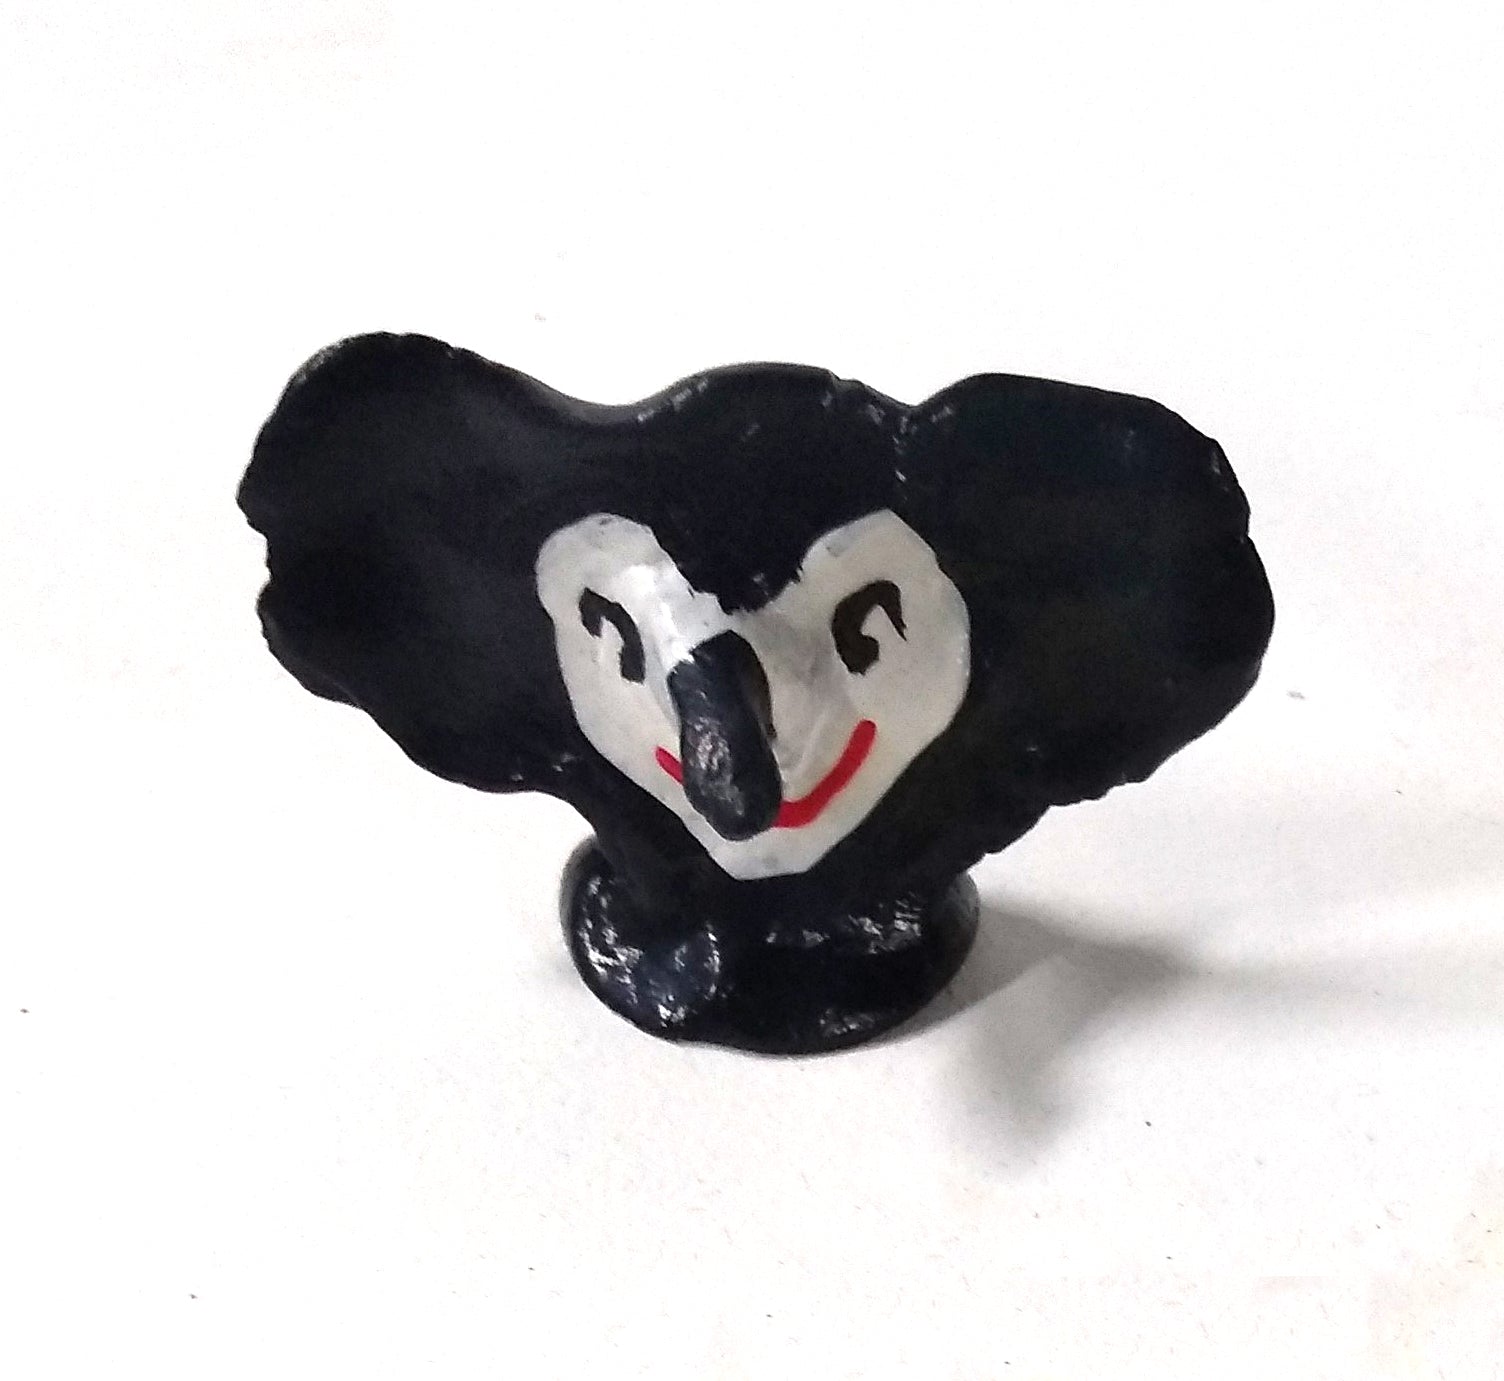 Anthony Iacomella, "Mickey 1" SOLD